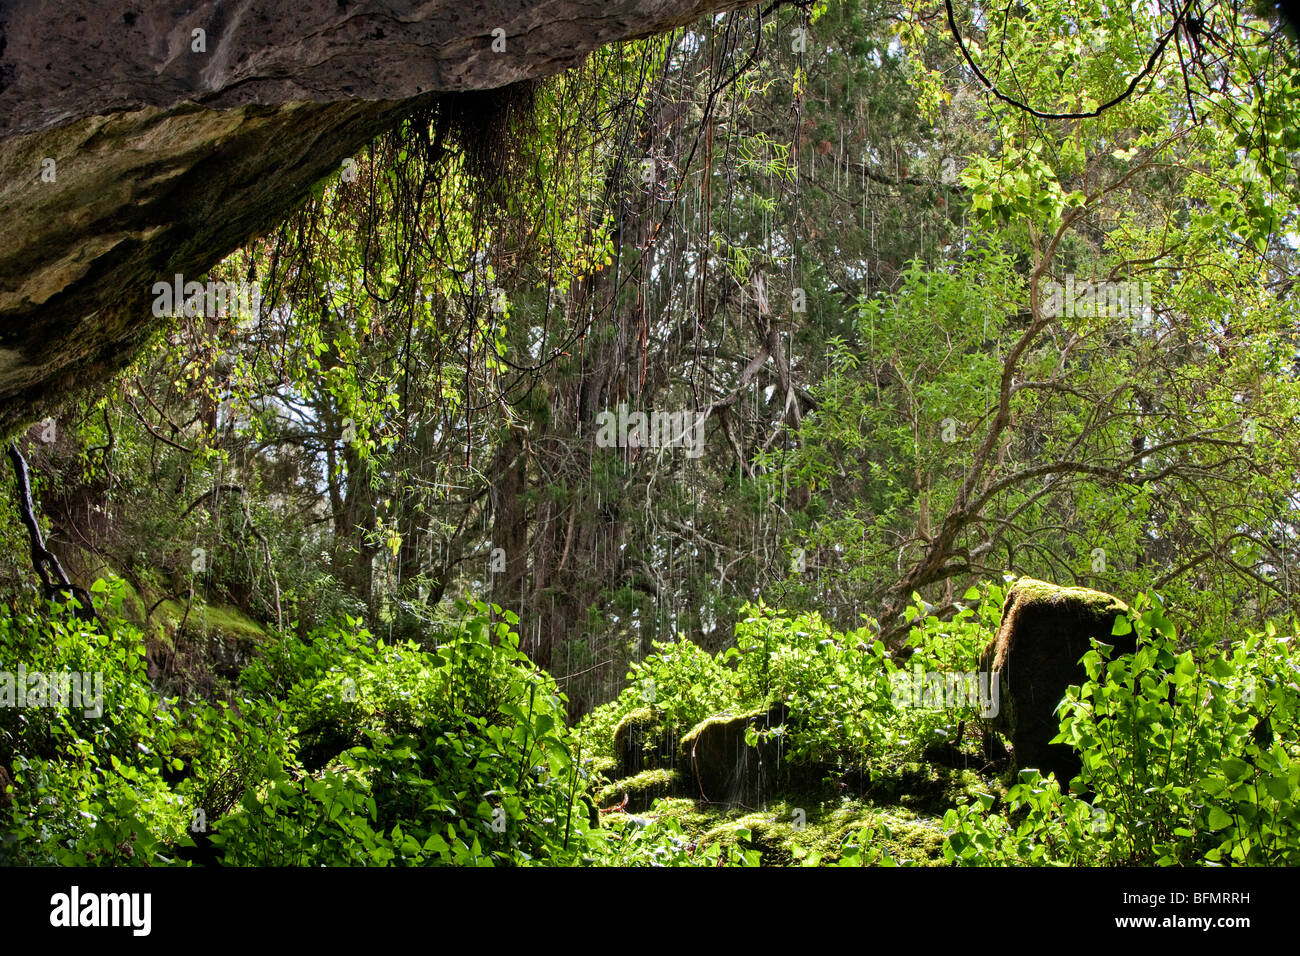 Kenya. Rainwater falling over the entrance to Kitum Cave on the slopes of Mount Elgon. Stock Photo